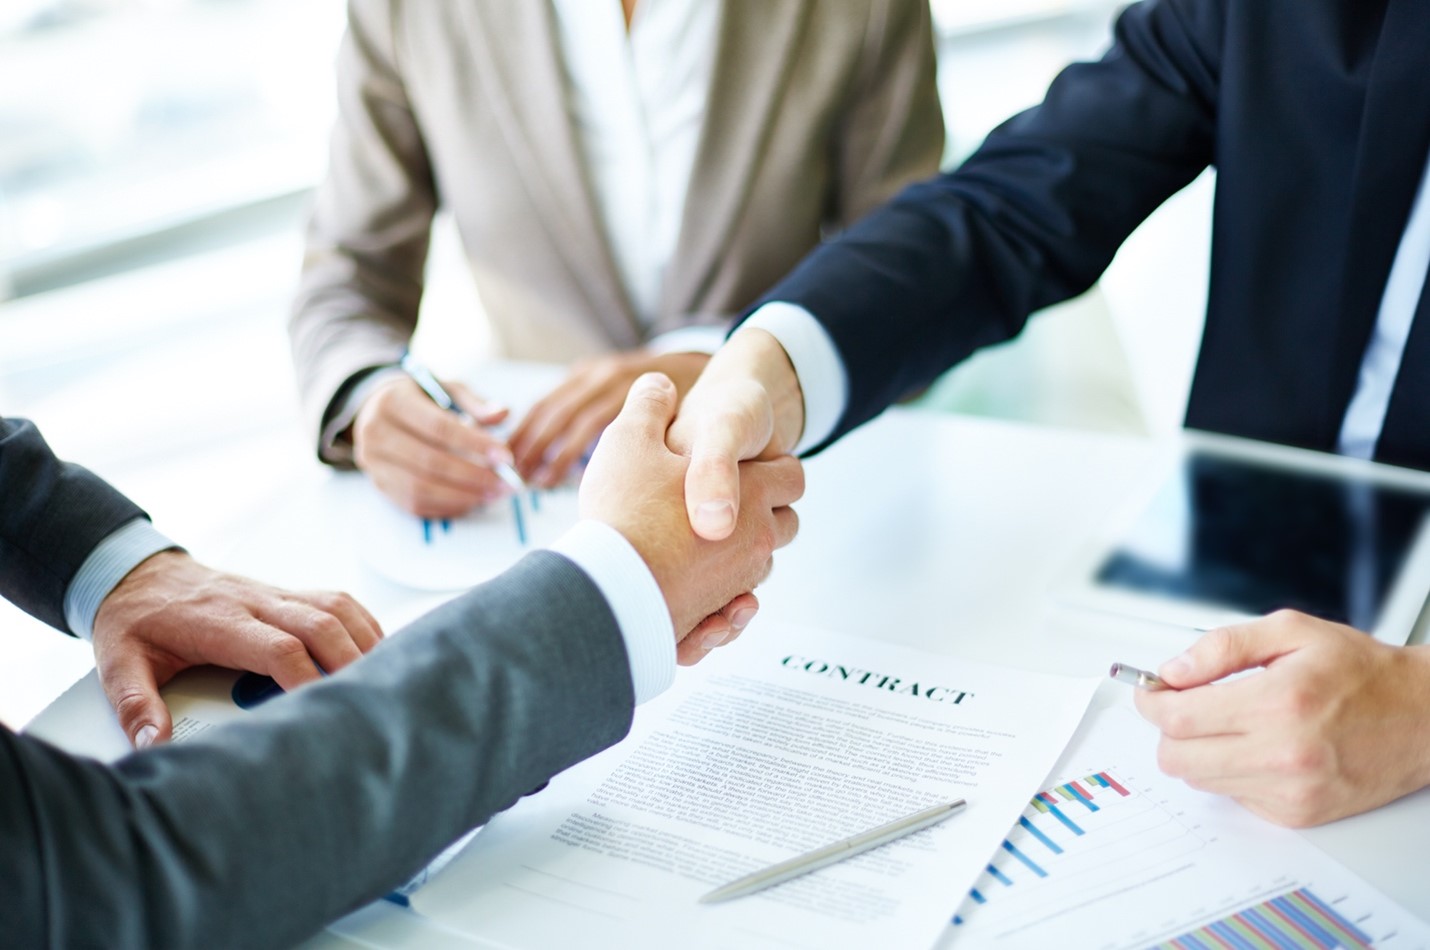 Two businesspeople shake hands over a contract while an attorney looks on